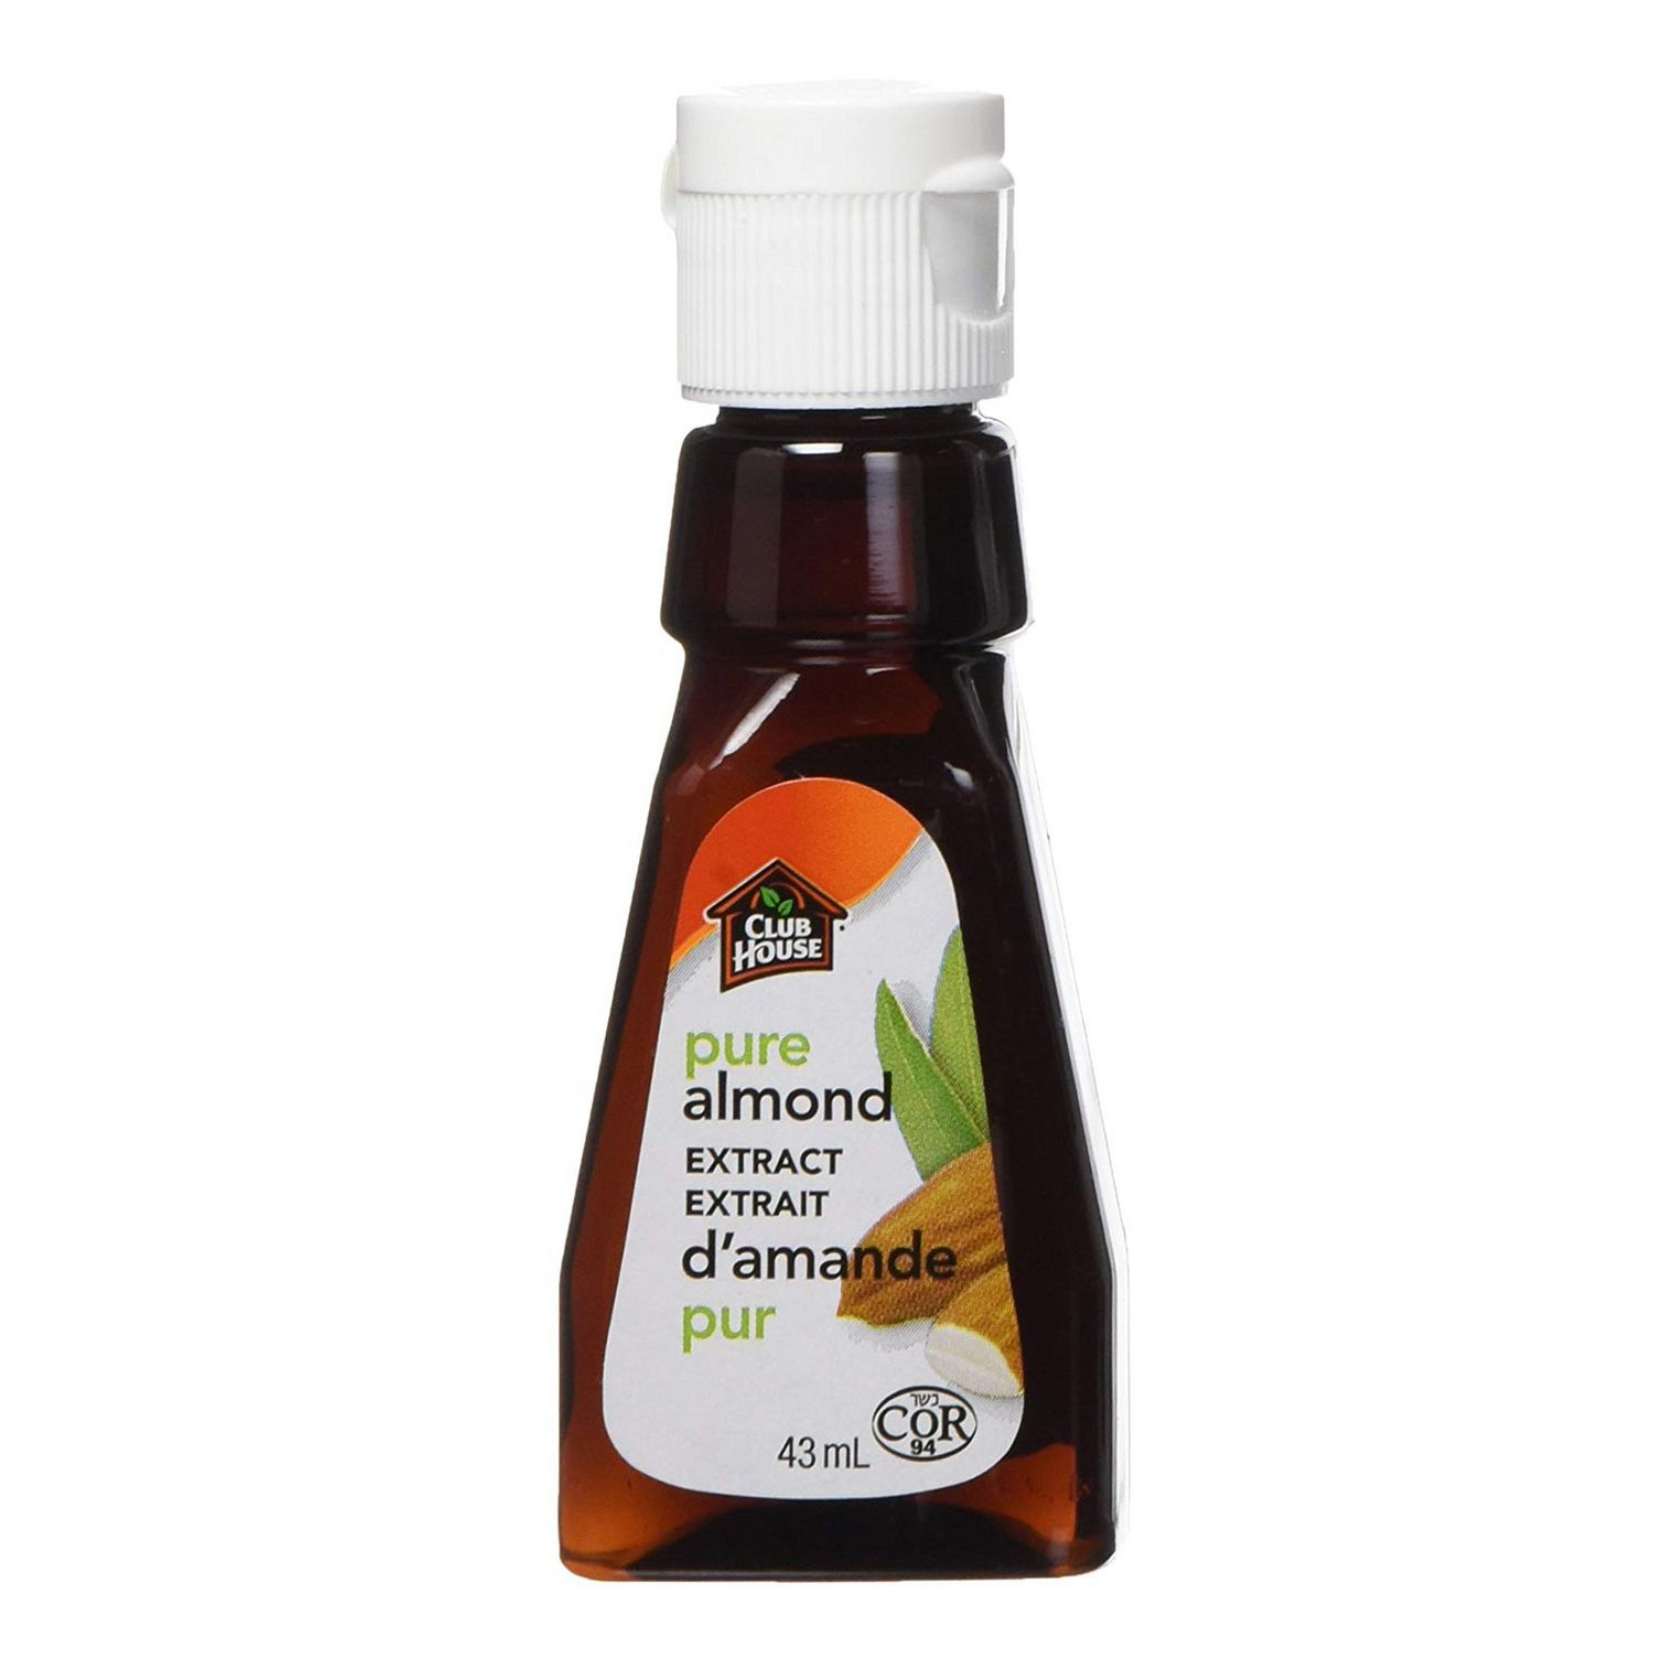 Club House Pure Almond Extract 43ml